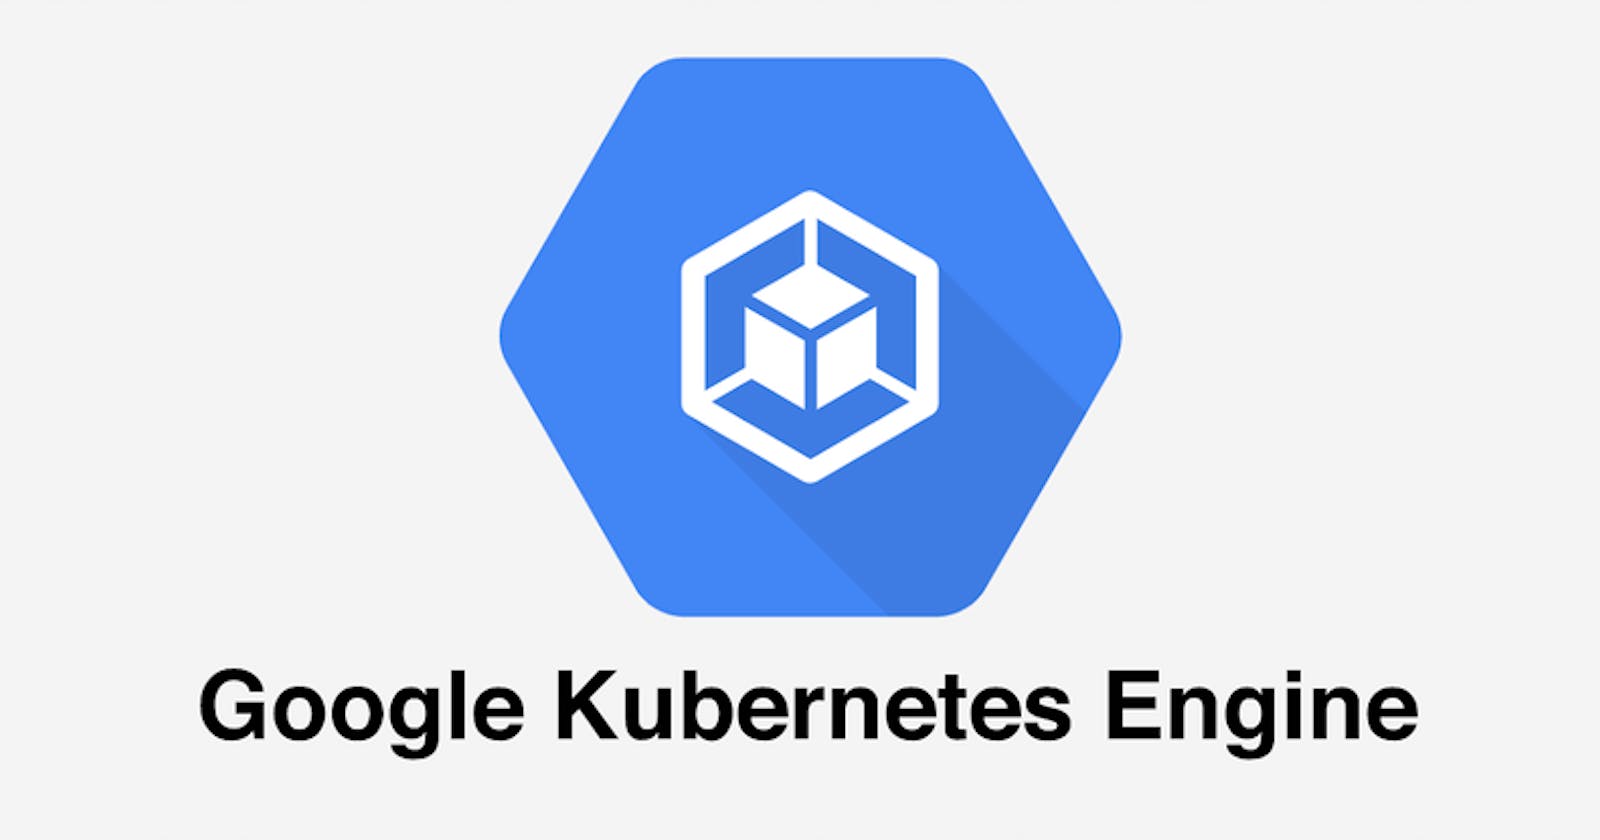 18. Deploying Applications on Kubernetes: Understanding Deployments and Services